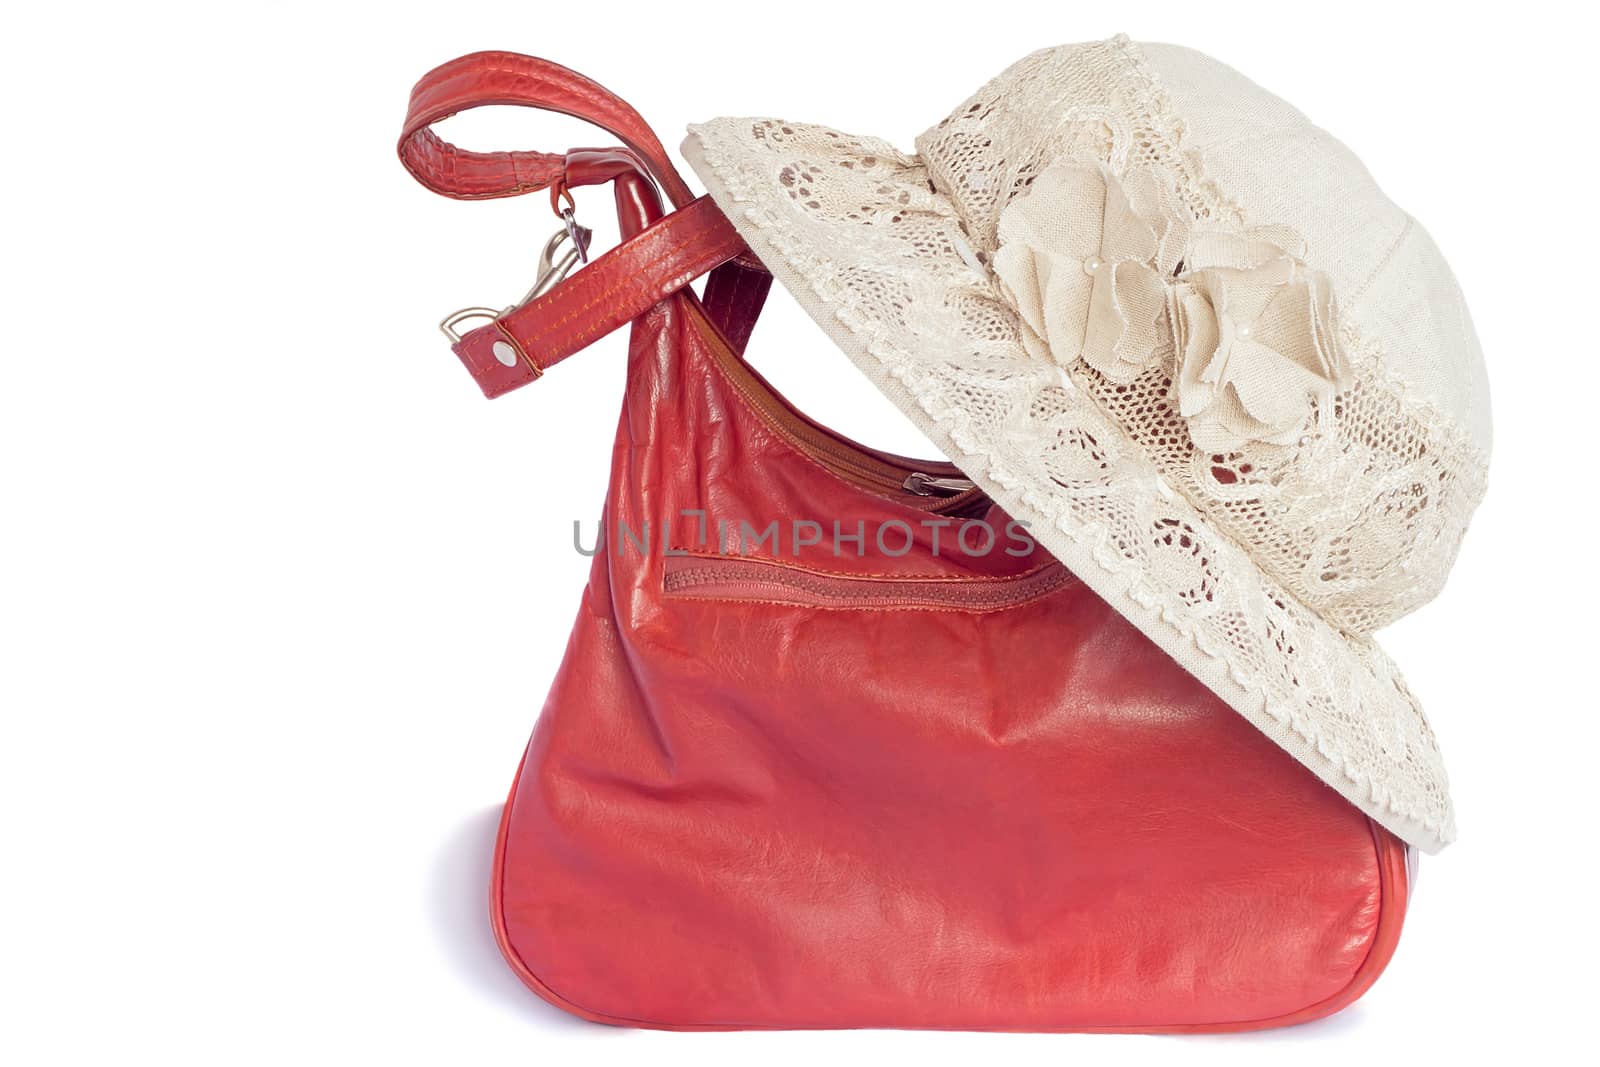 Female summer hat for protection against the sun and a bag on a  by georgina198